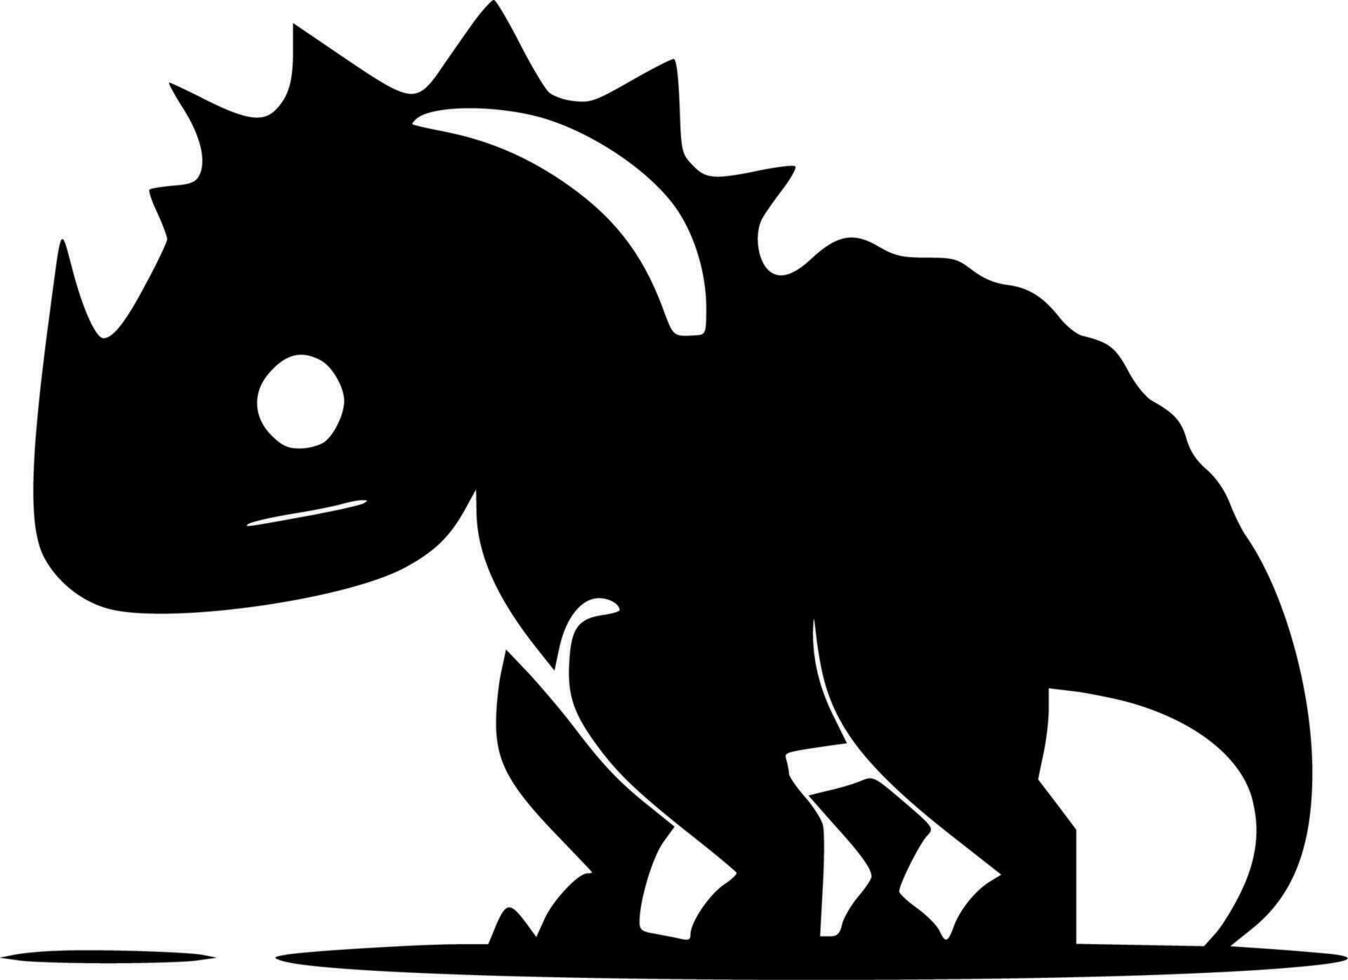 Dino - High Quality Vector Logo - Vector illustration ideal for T-shirt graphic